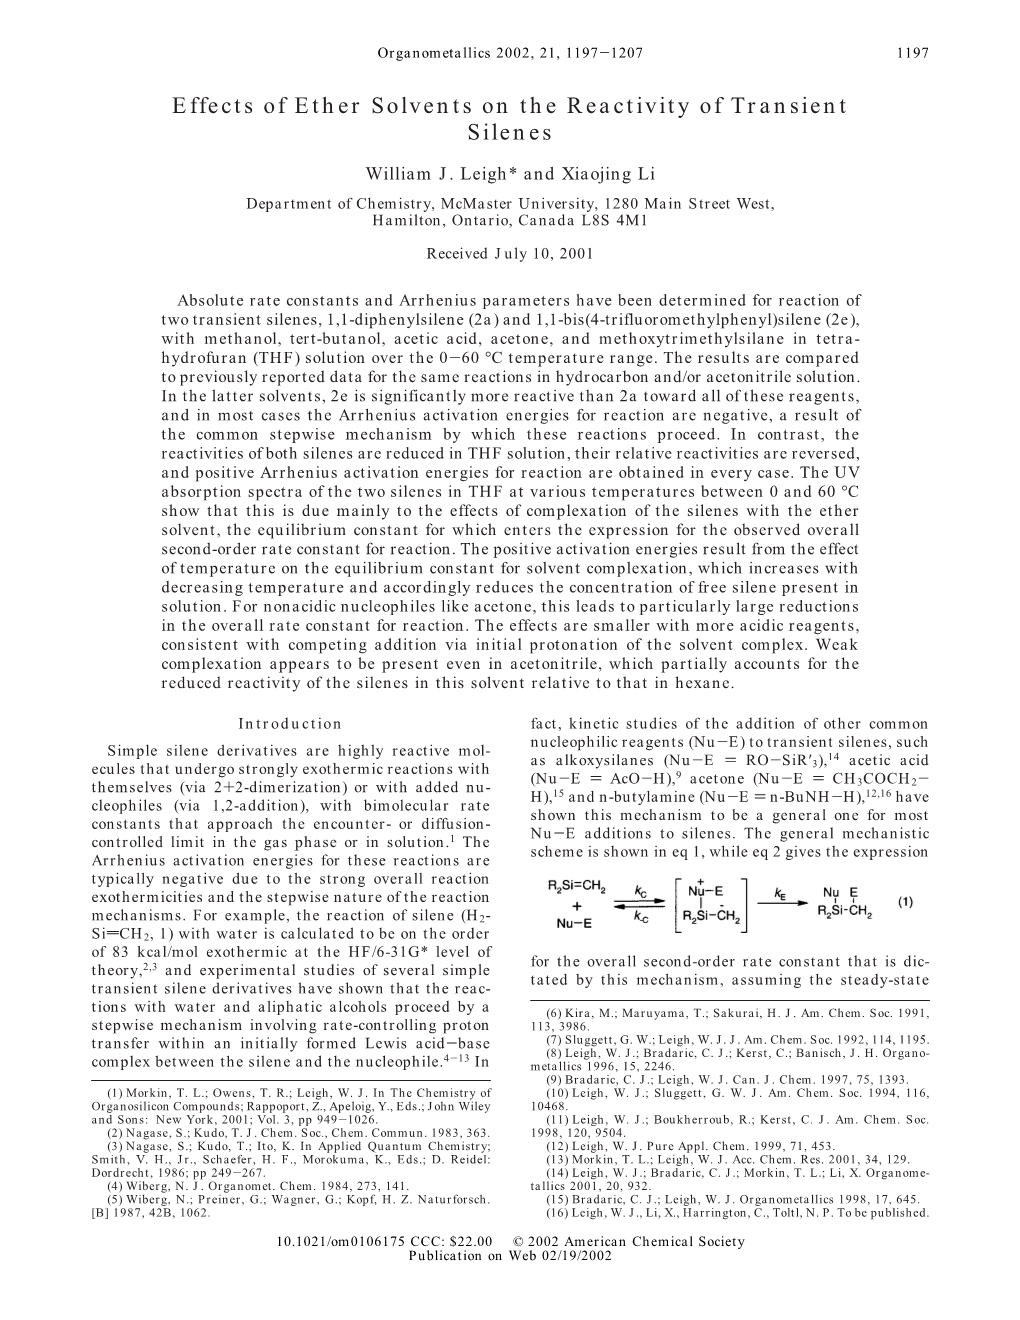 Effects of Ether Solvents on the Reactivity of Transient Silenes